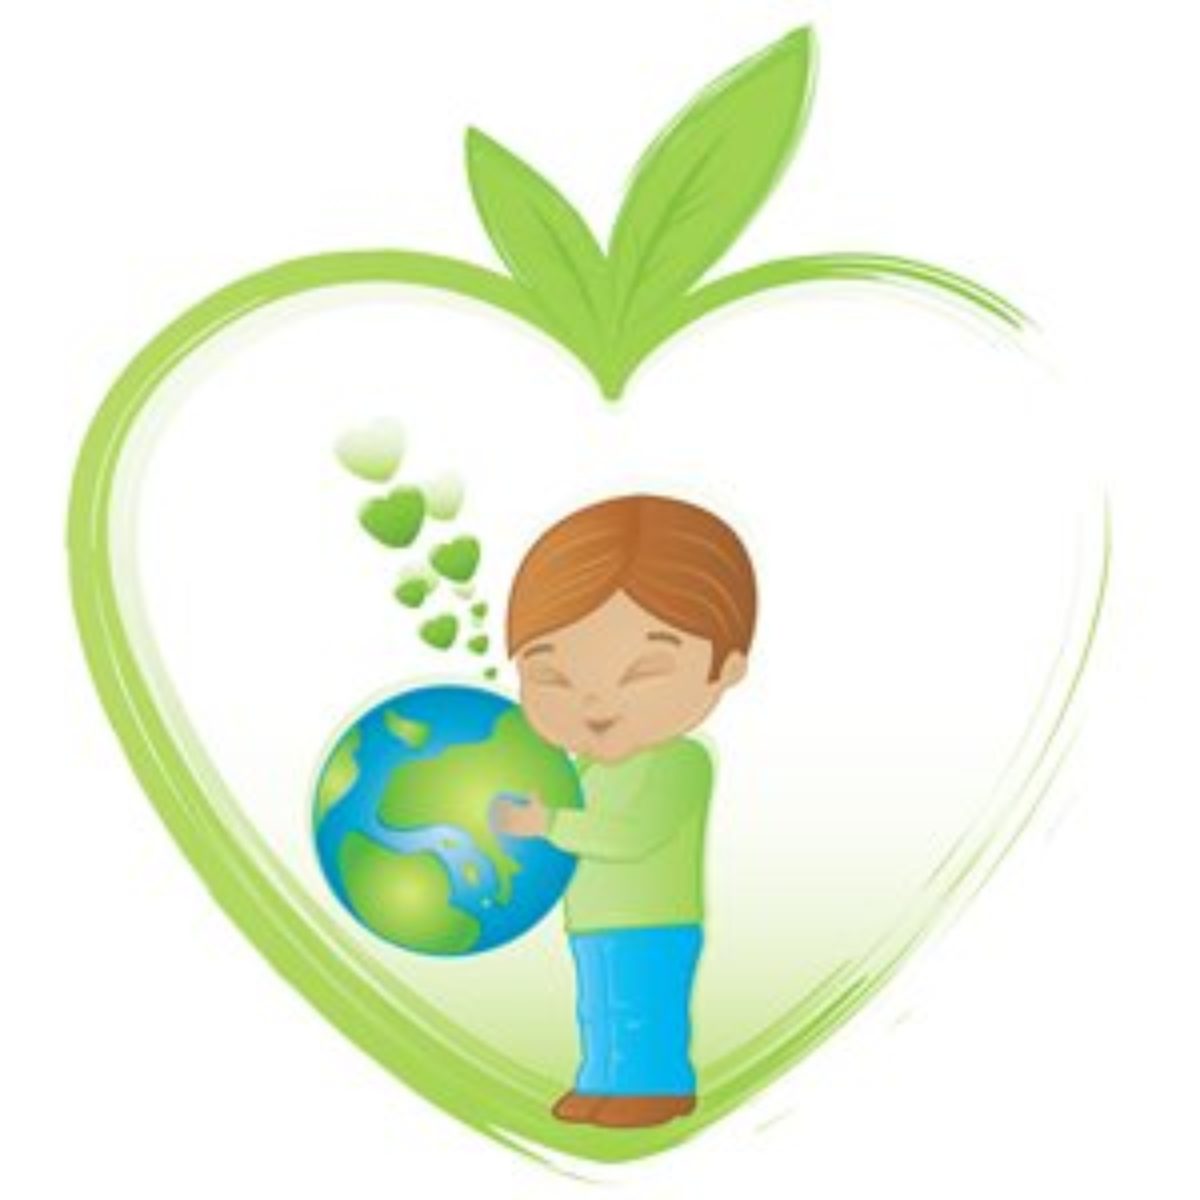 earth day clip art for kids